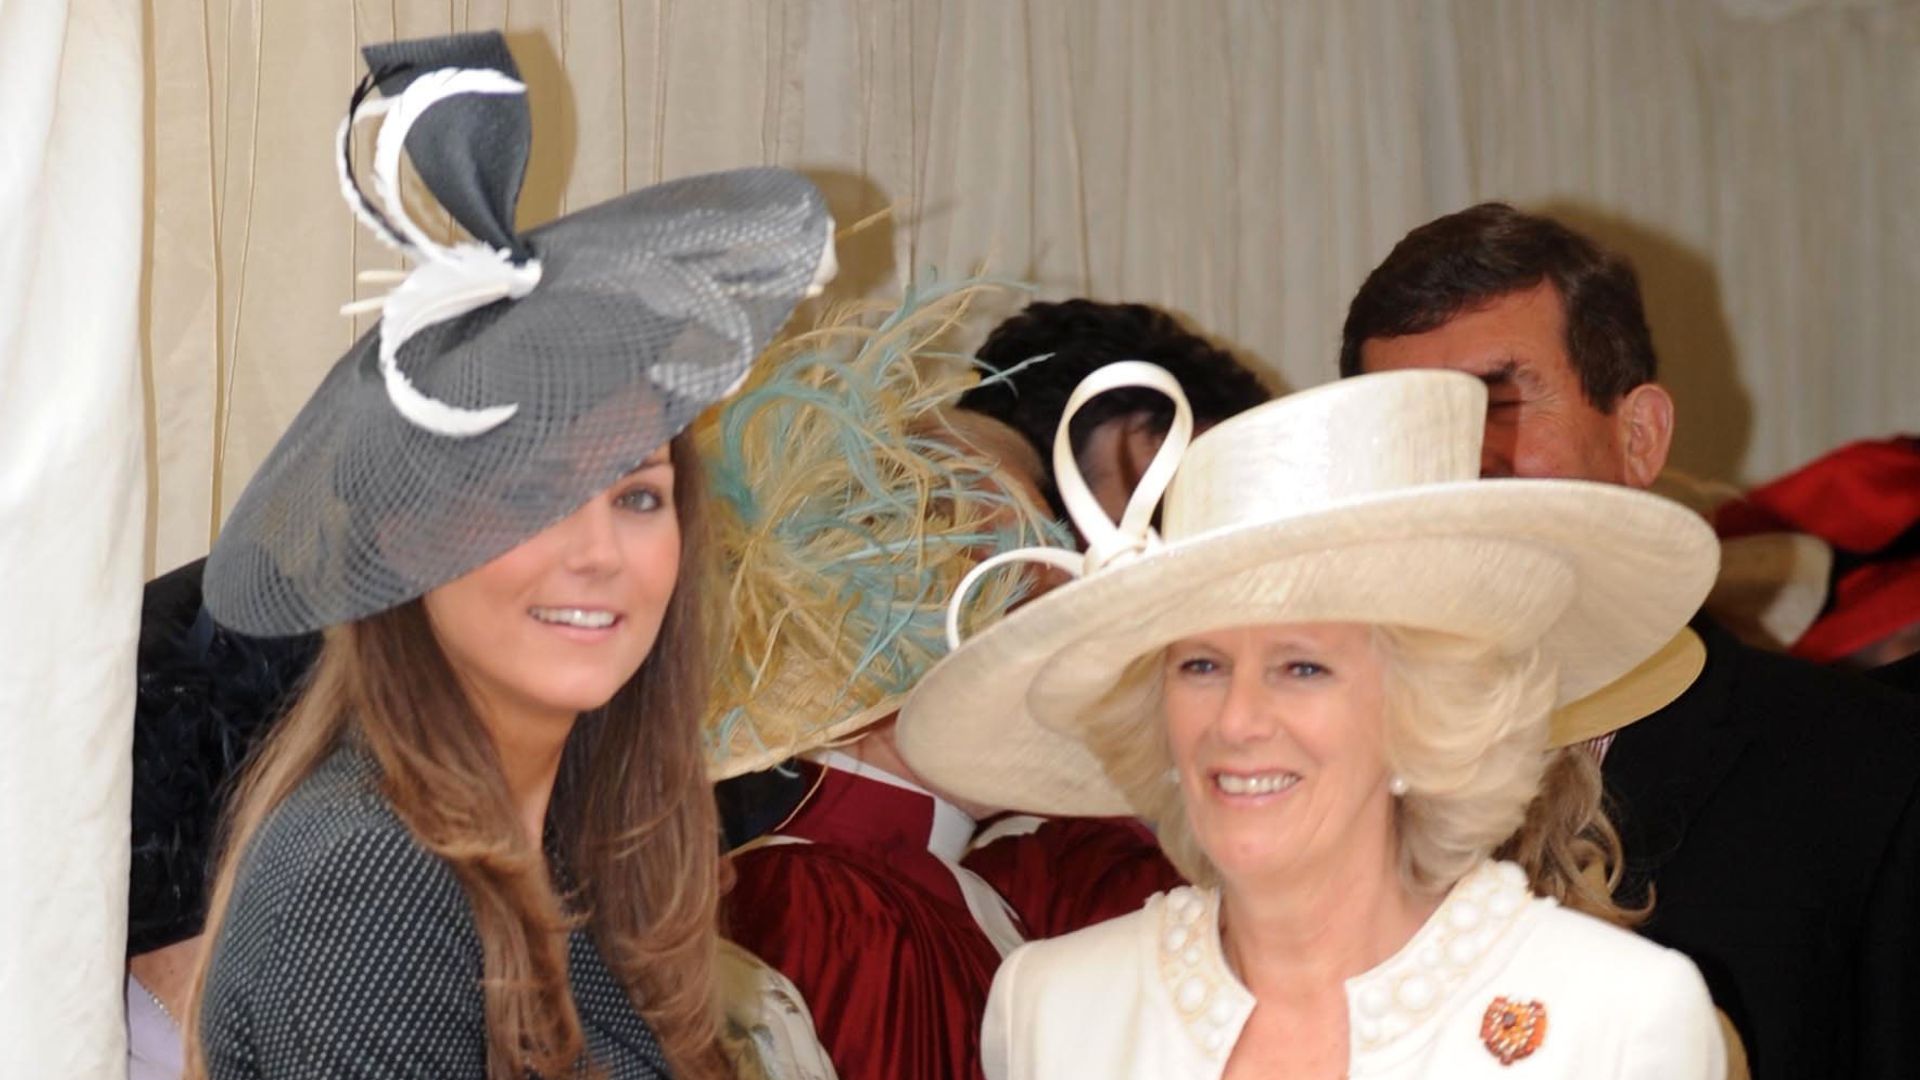 Kate Middleton and Queen Camilla